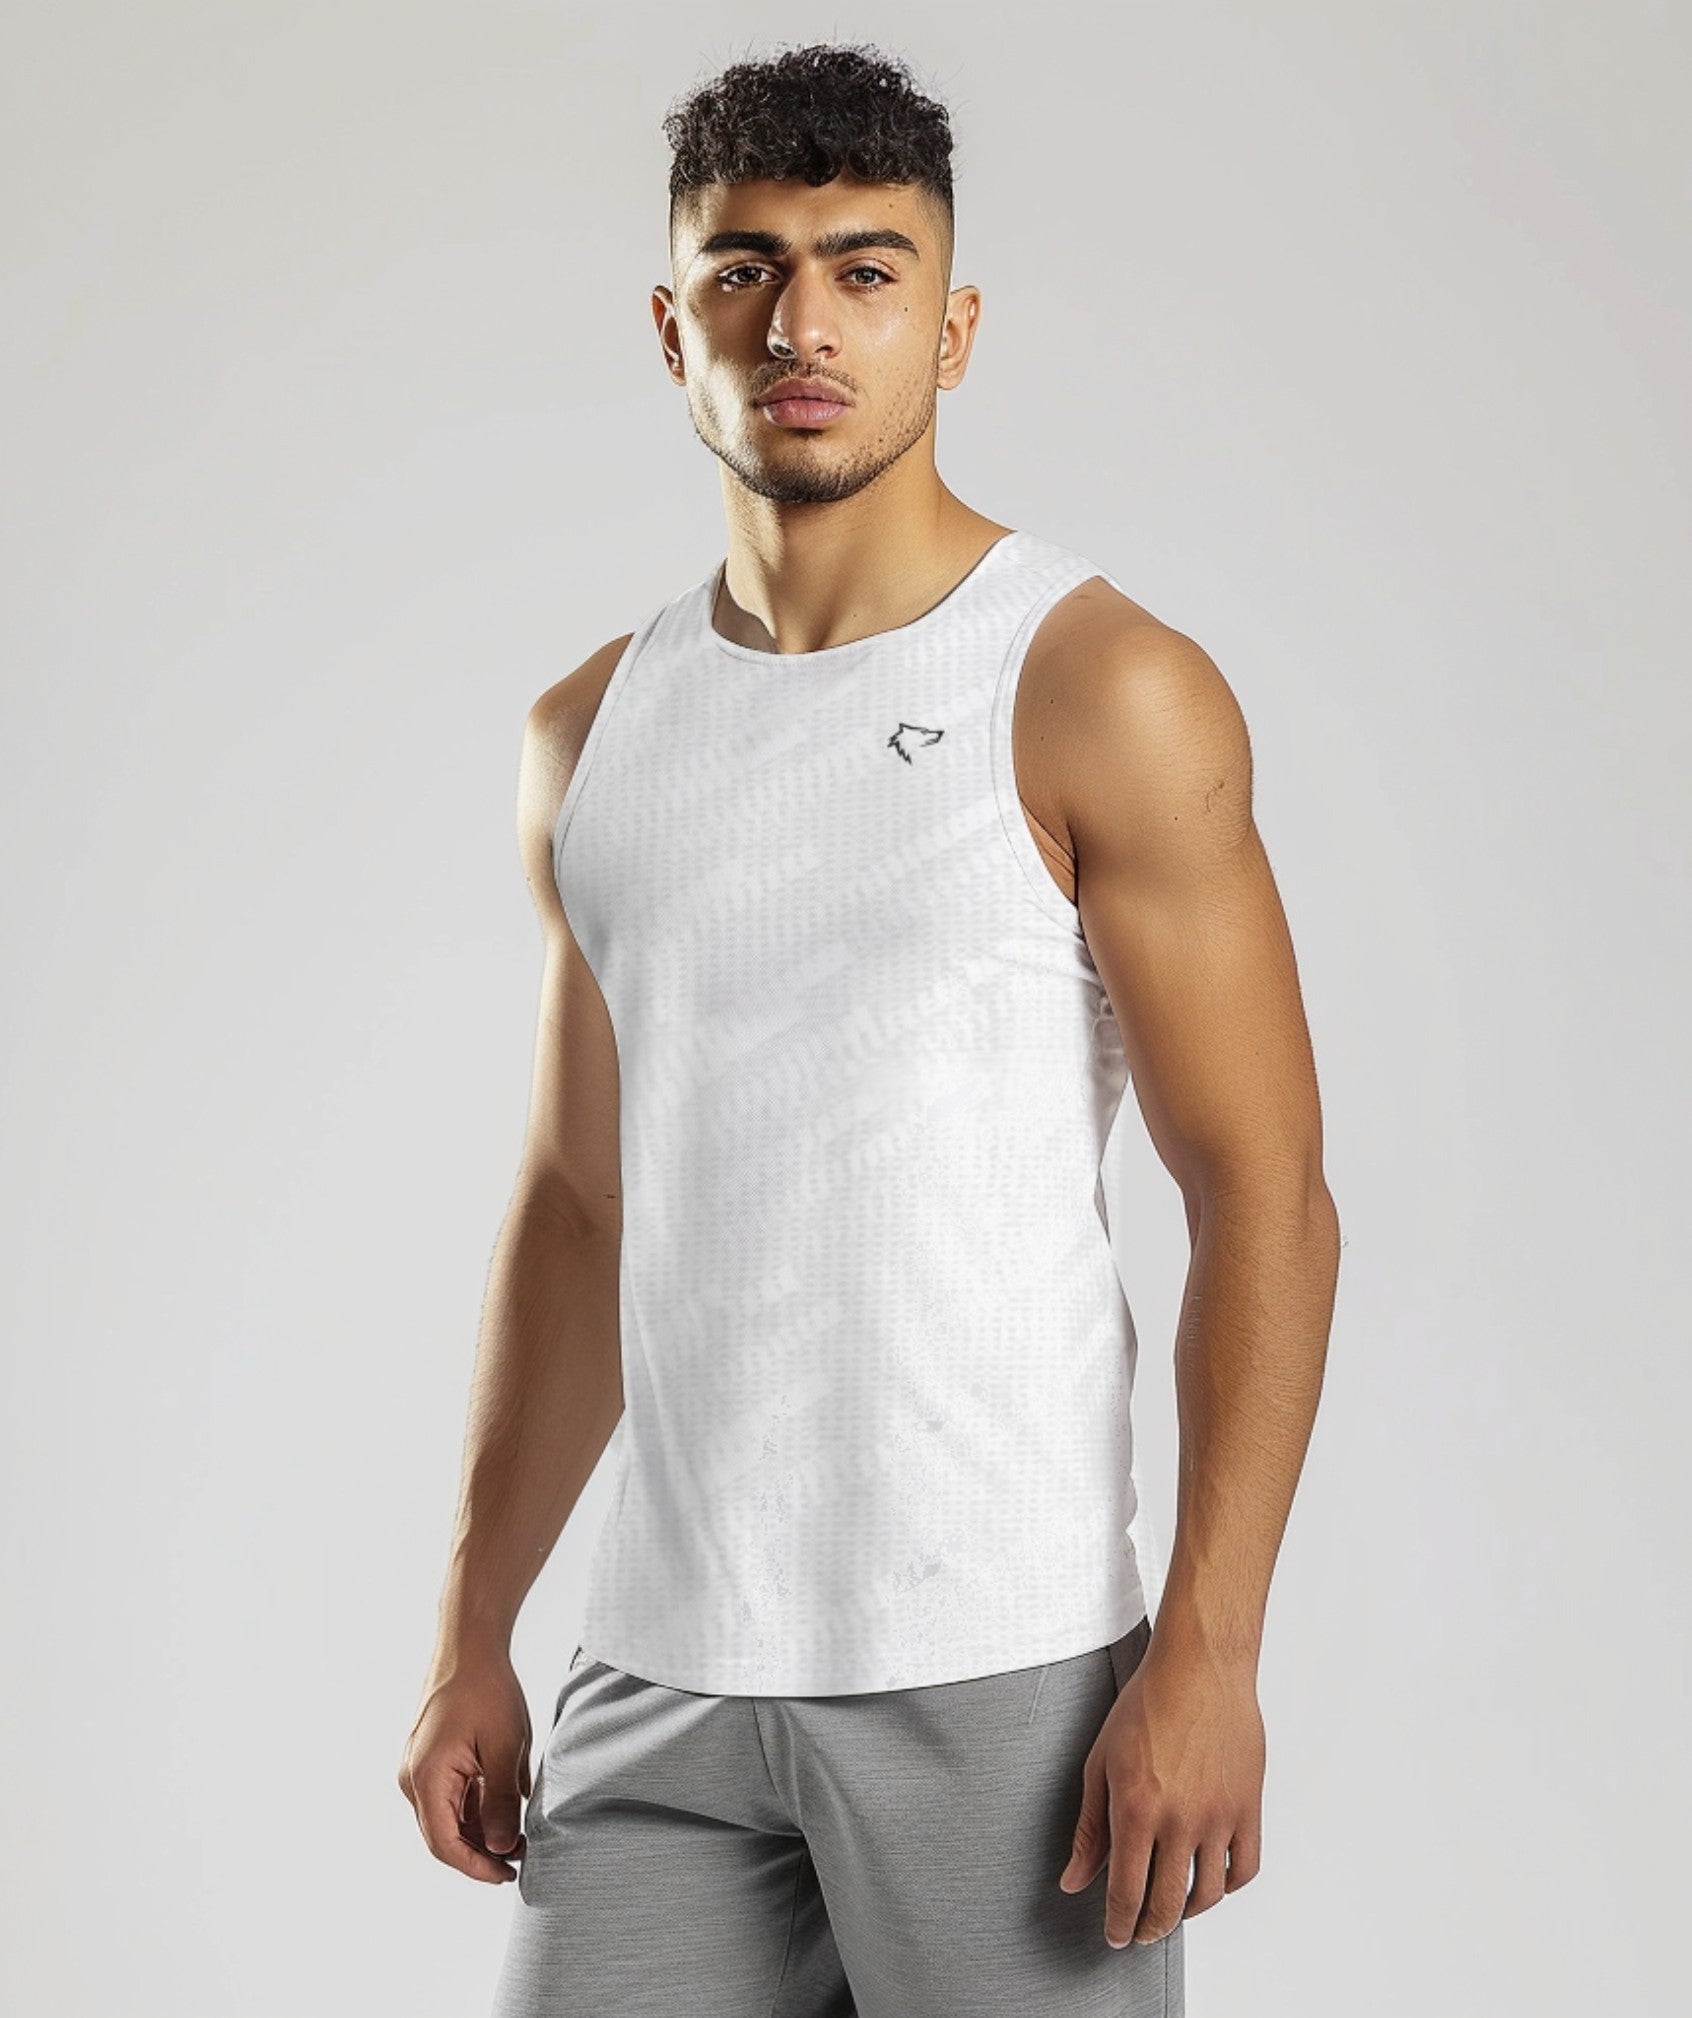 Apex™ white Flex Tank Top front view - eco-friendly and flexible top